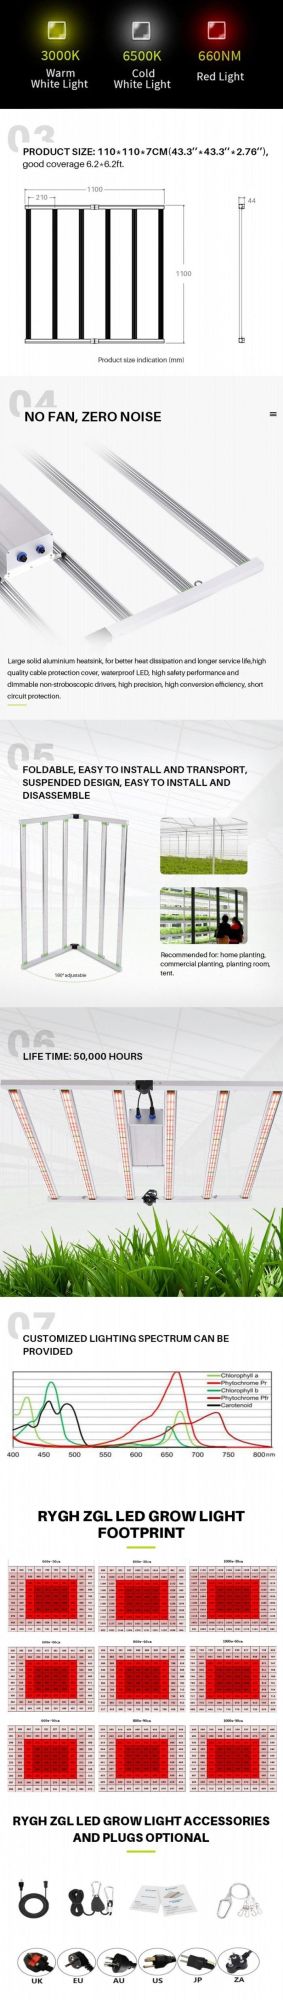 Rygh-Gl10-1000W (Yields up to 4Lbs) Samsung Lm301b +660nm Foldable 0-10V Spydr Spider LED Grow Light for Us Market